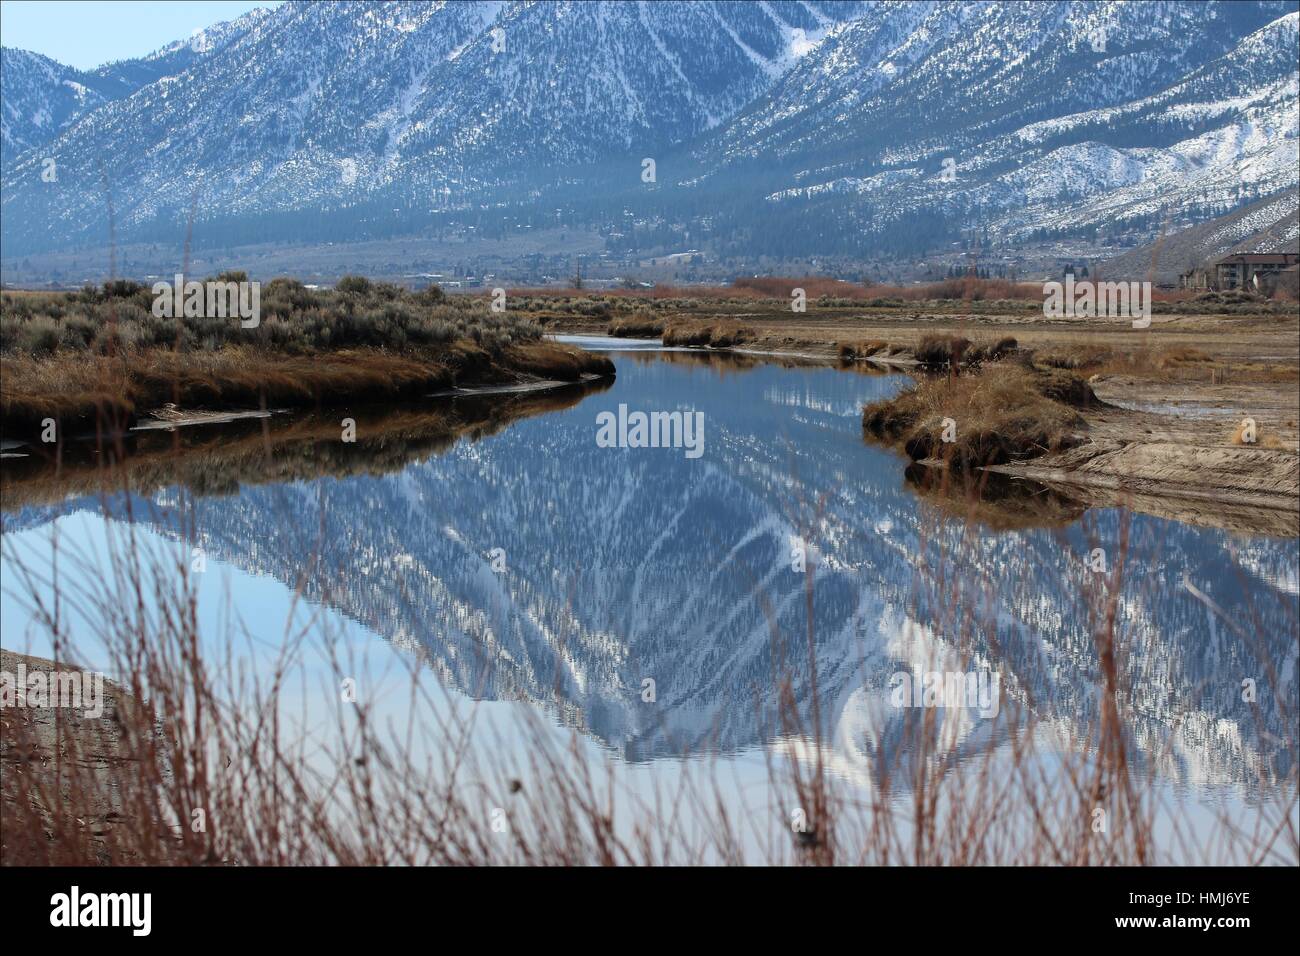 The eastern side of the Sierra Nevada mountains reflect in a pond located in the Carson Valley, near Genoa, Nevada, USA Stock Photo